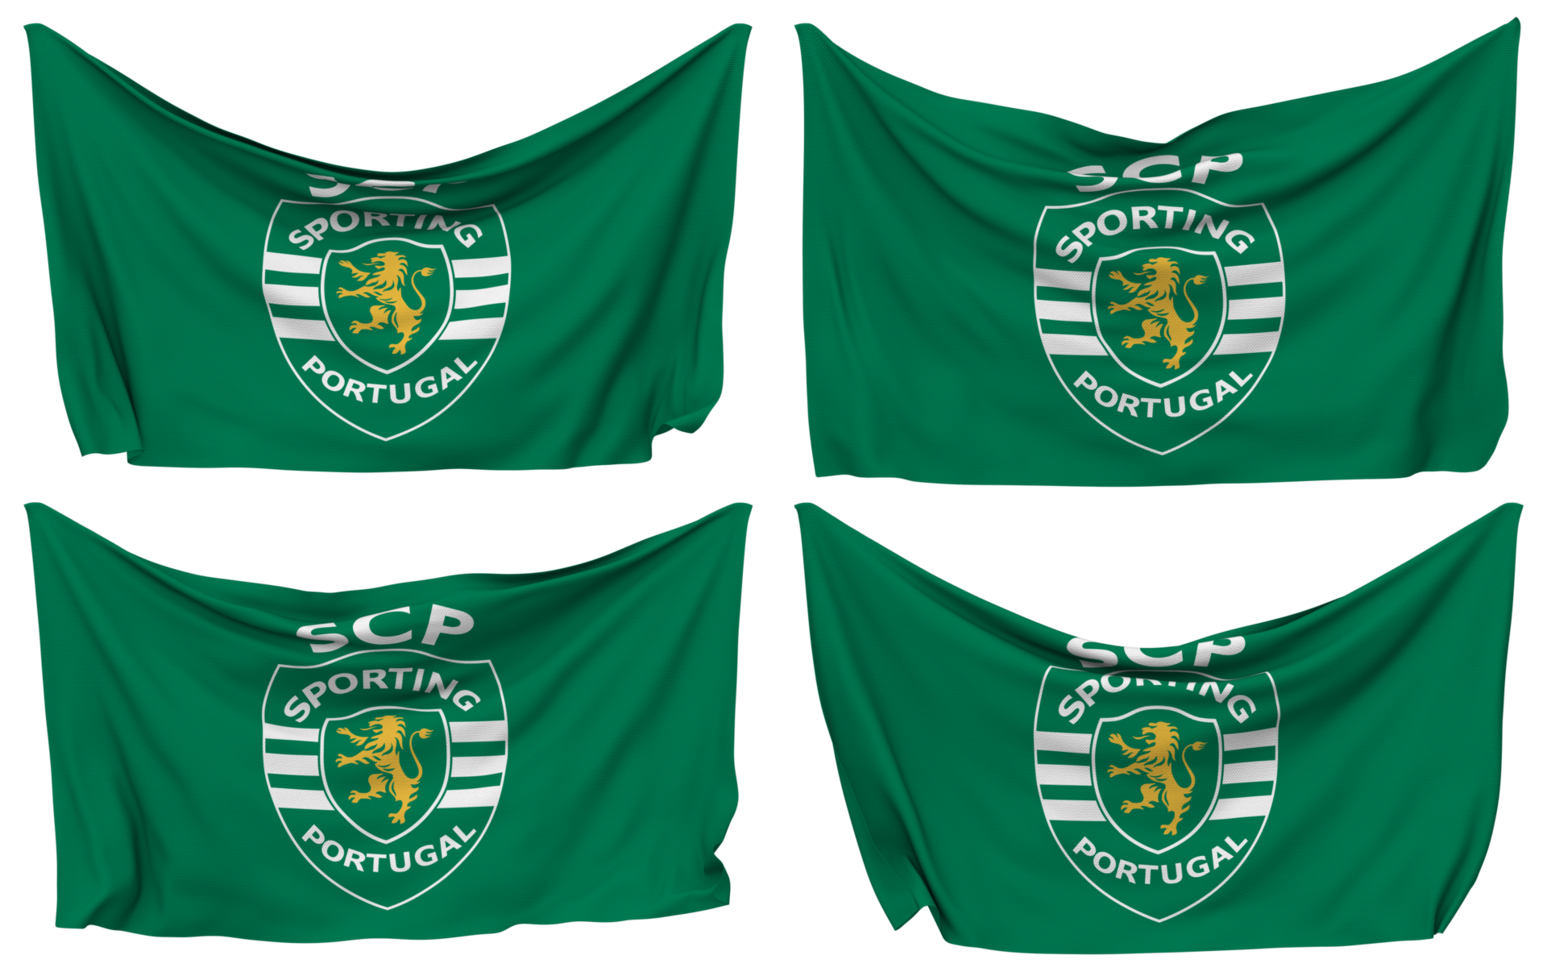 Sporting Clube de Portugal, Sporting CP Pinned Flag from Corners, Isolated with Different Waving Variations, 3D Rendering png